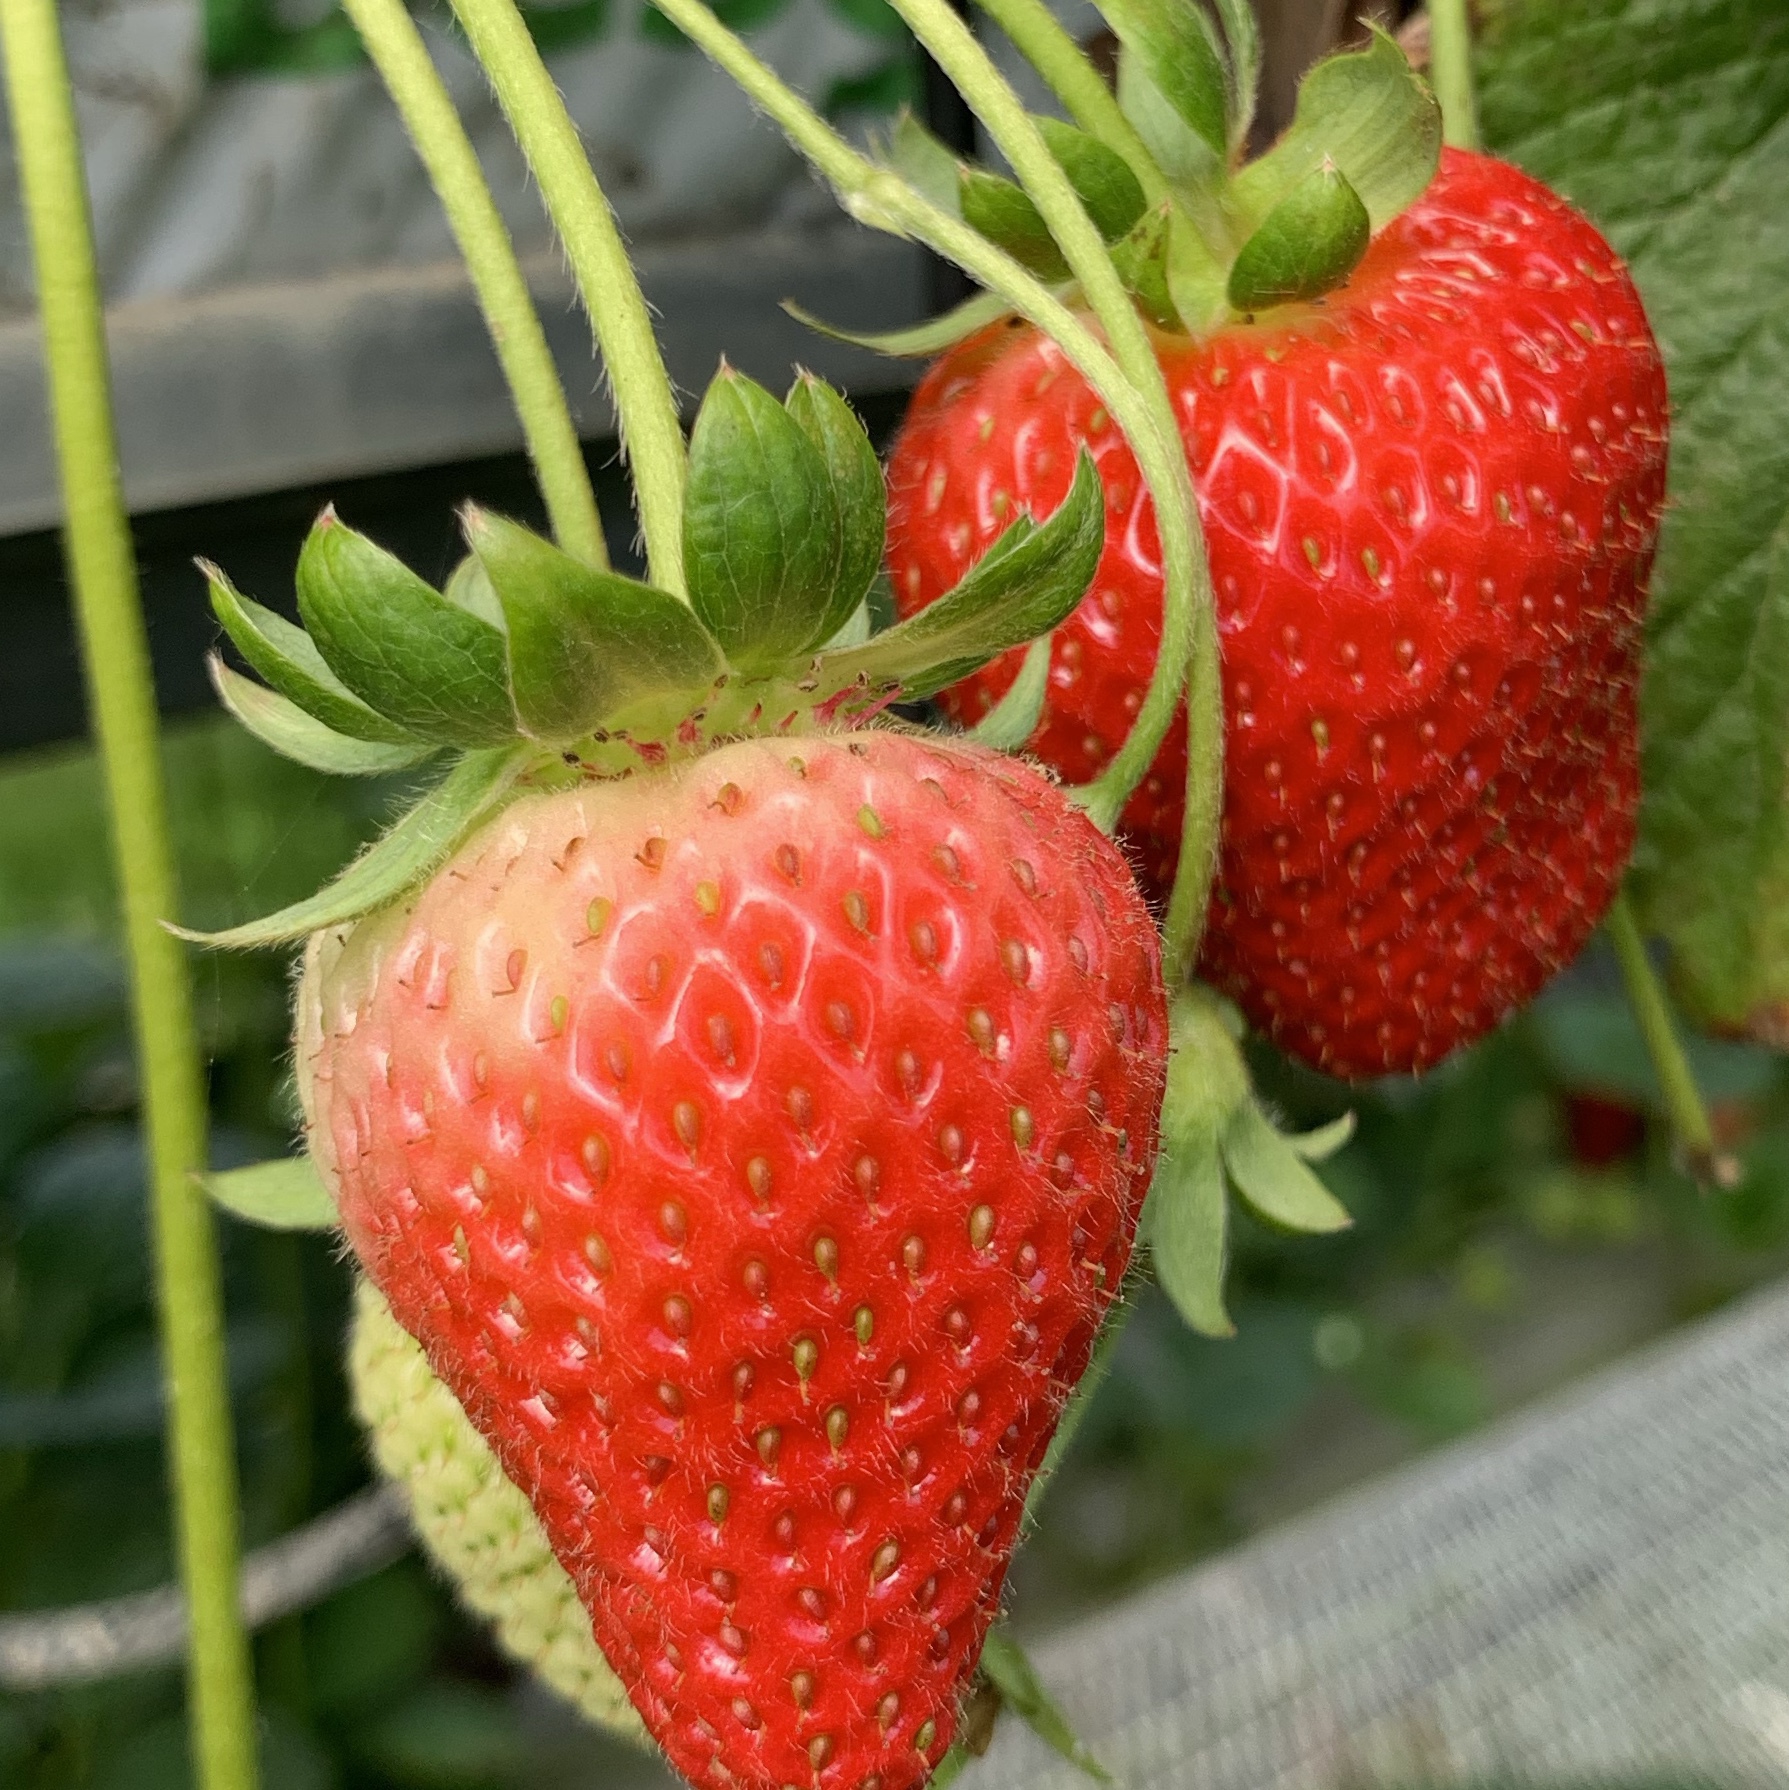 Strawberries on the plant at the pick-your-own farm